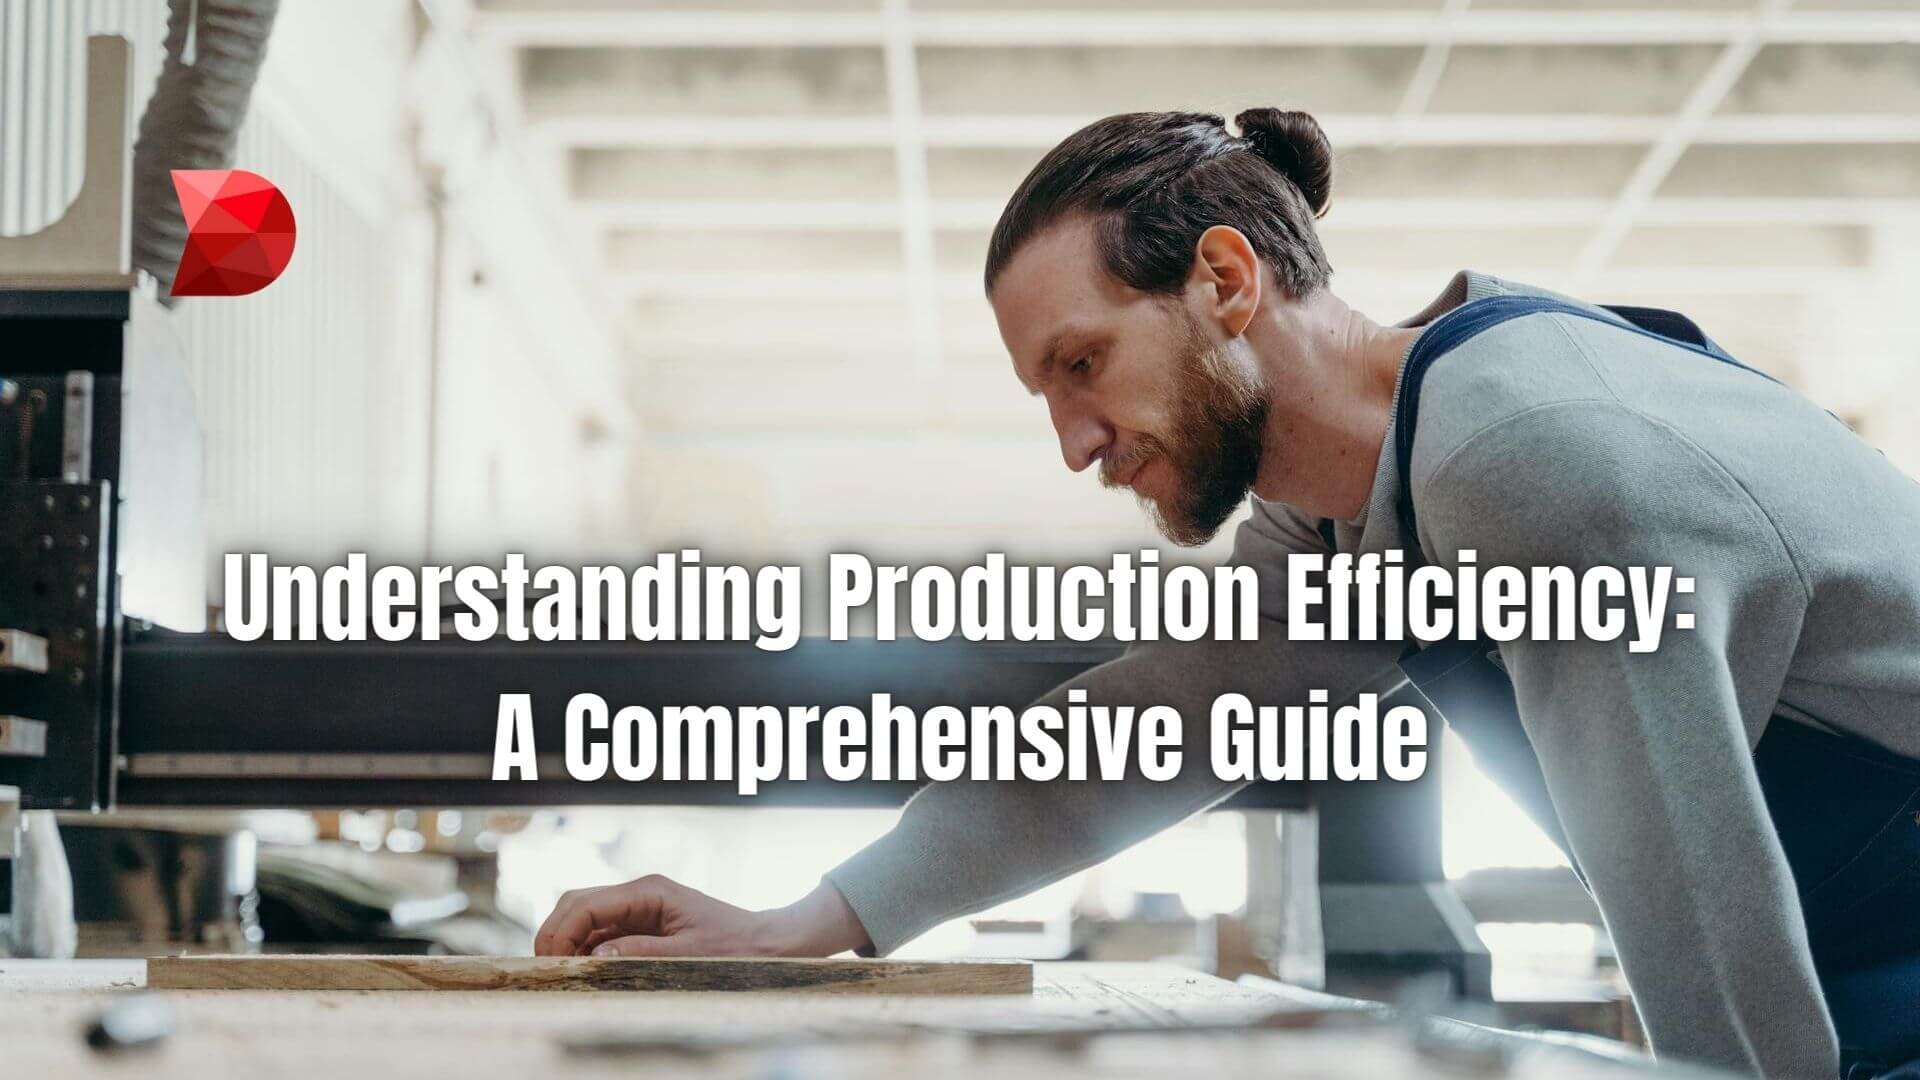 Take control of your production processes with our essential guide to efficiency. Learn how to minimize downtime and increase output.